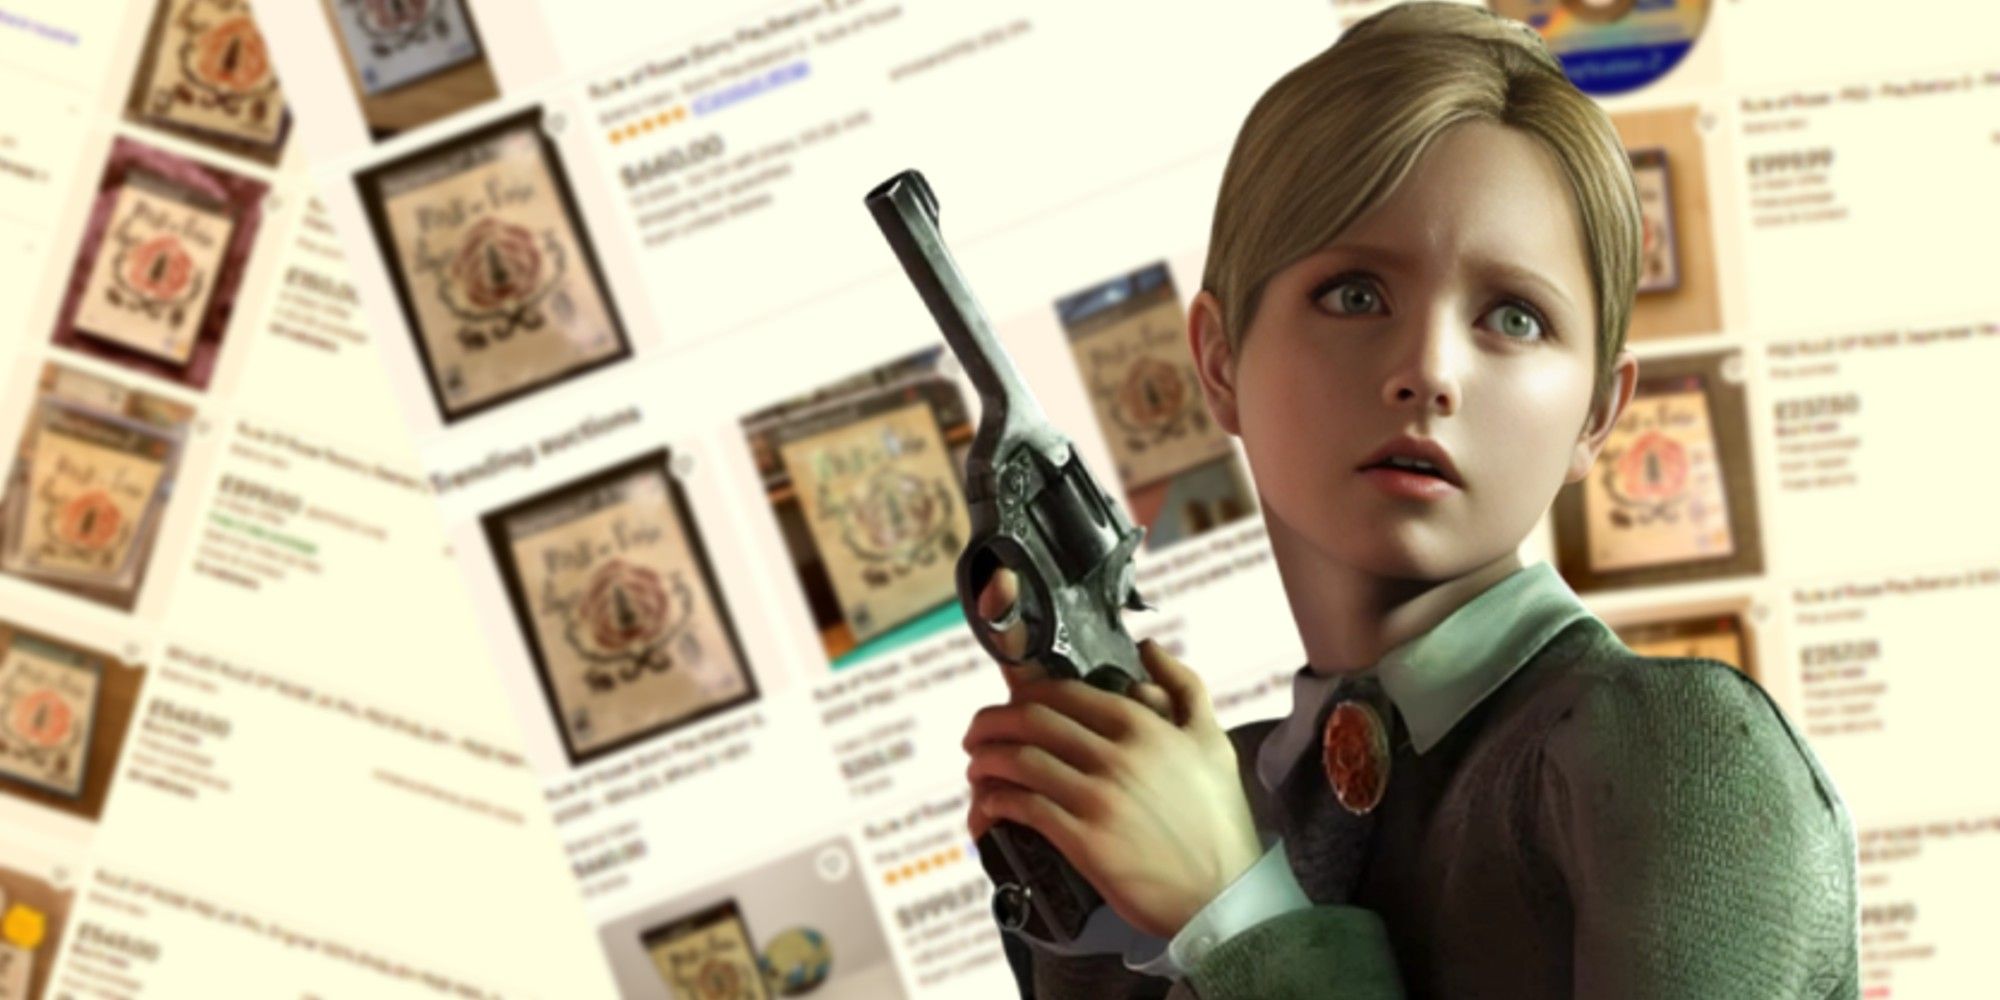 Jennifer from Rule of Rose holding a gun and looking afraid, on a background of blurred eBay listings.